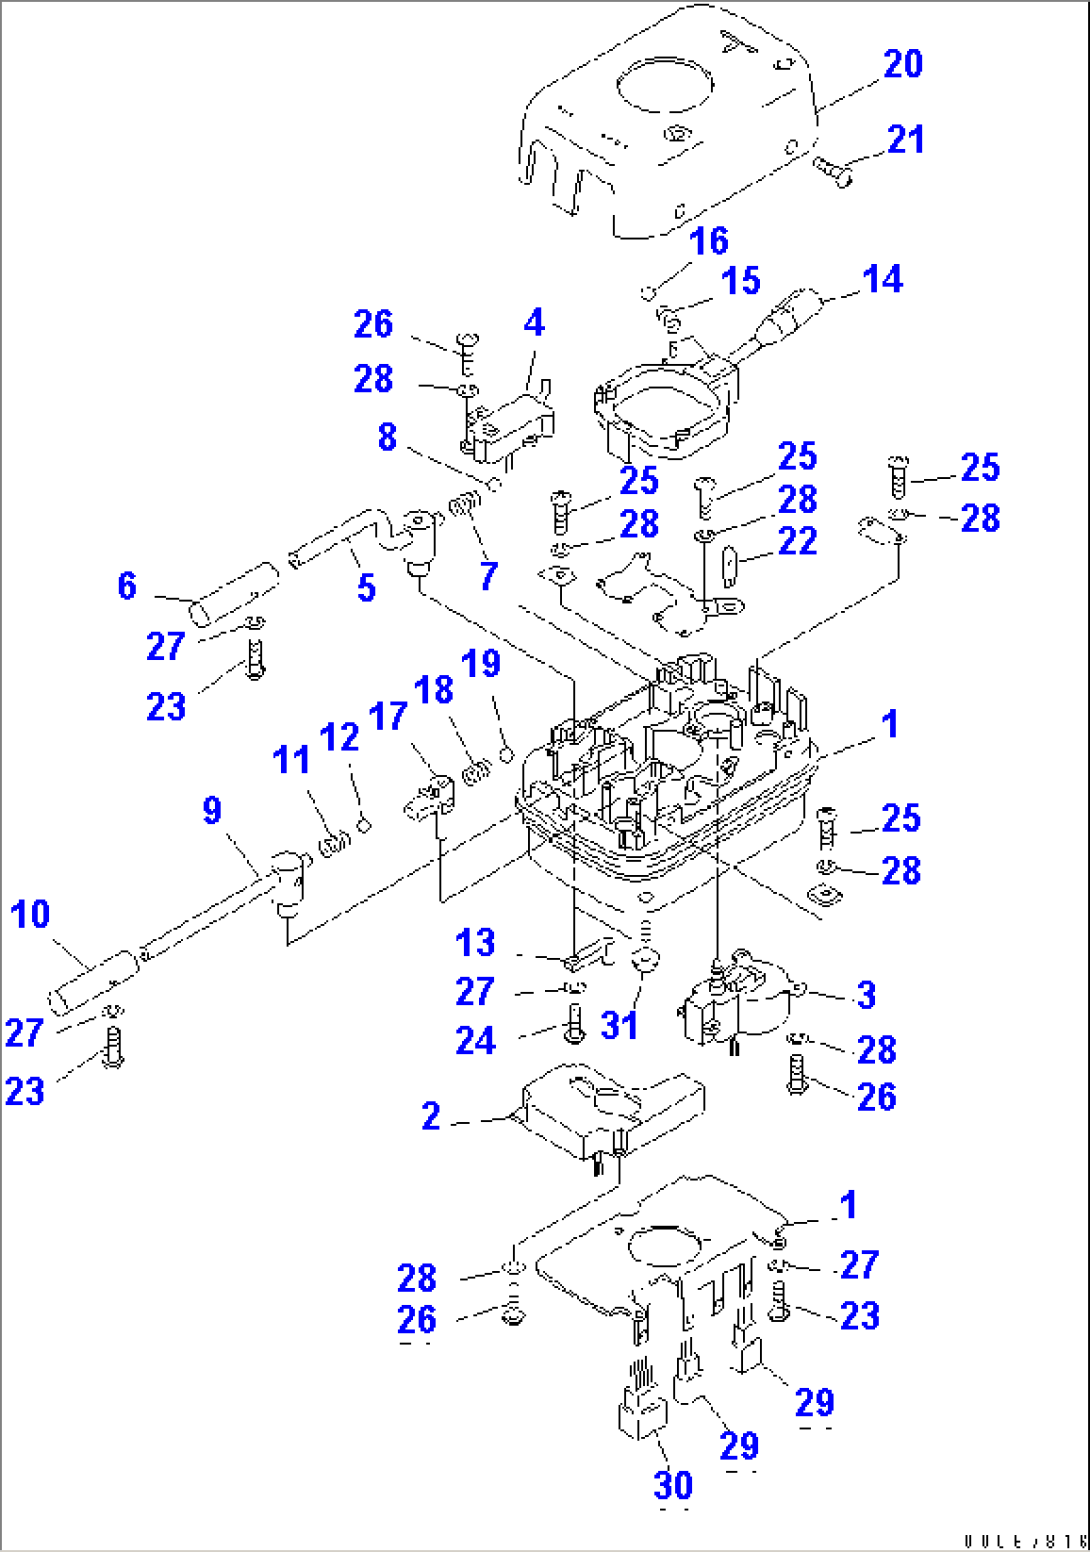 TRANSMISSION CONTROL (FOR 4-SPEED)(#54095-)